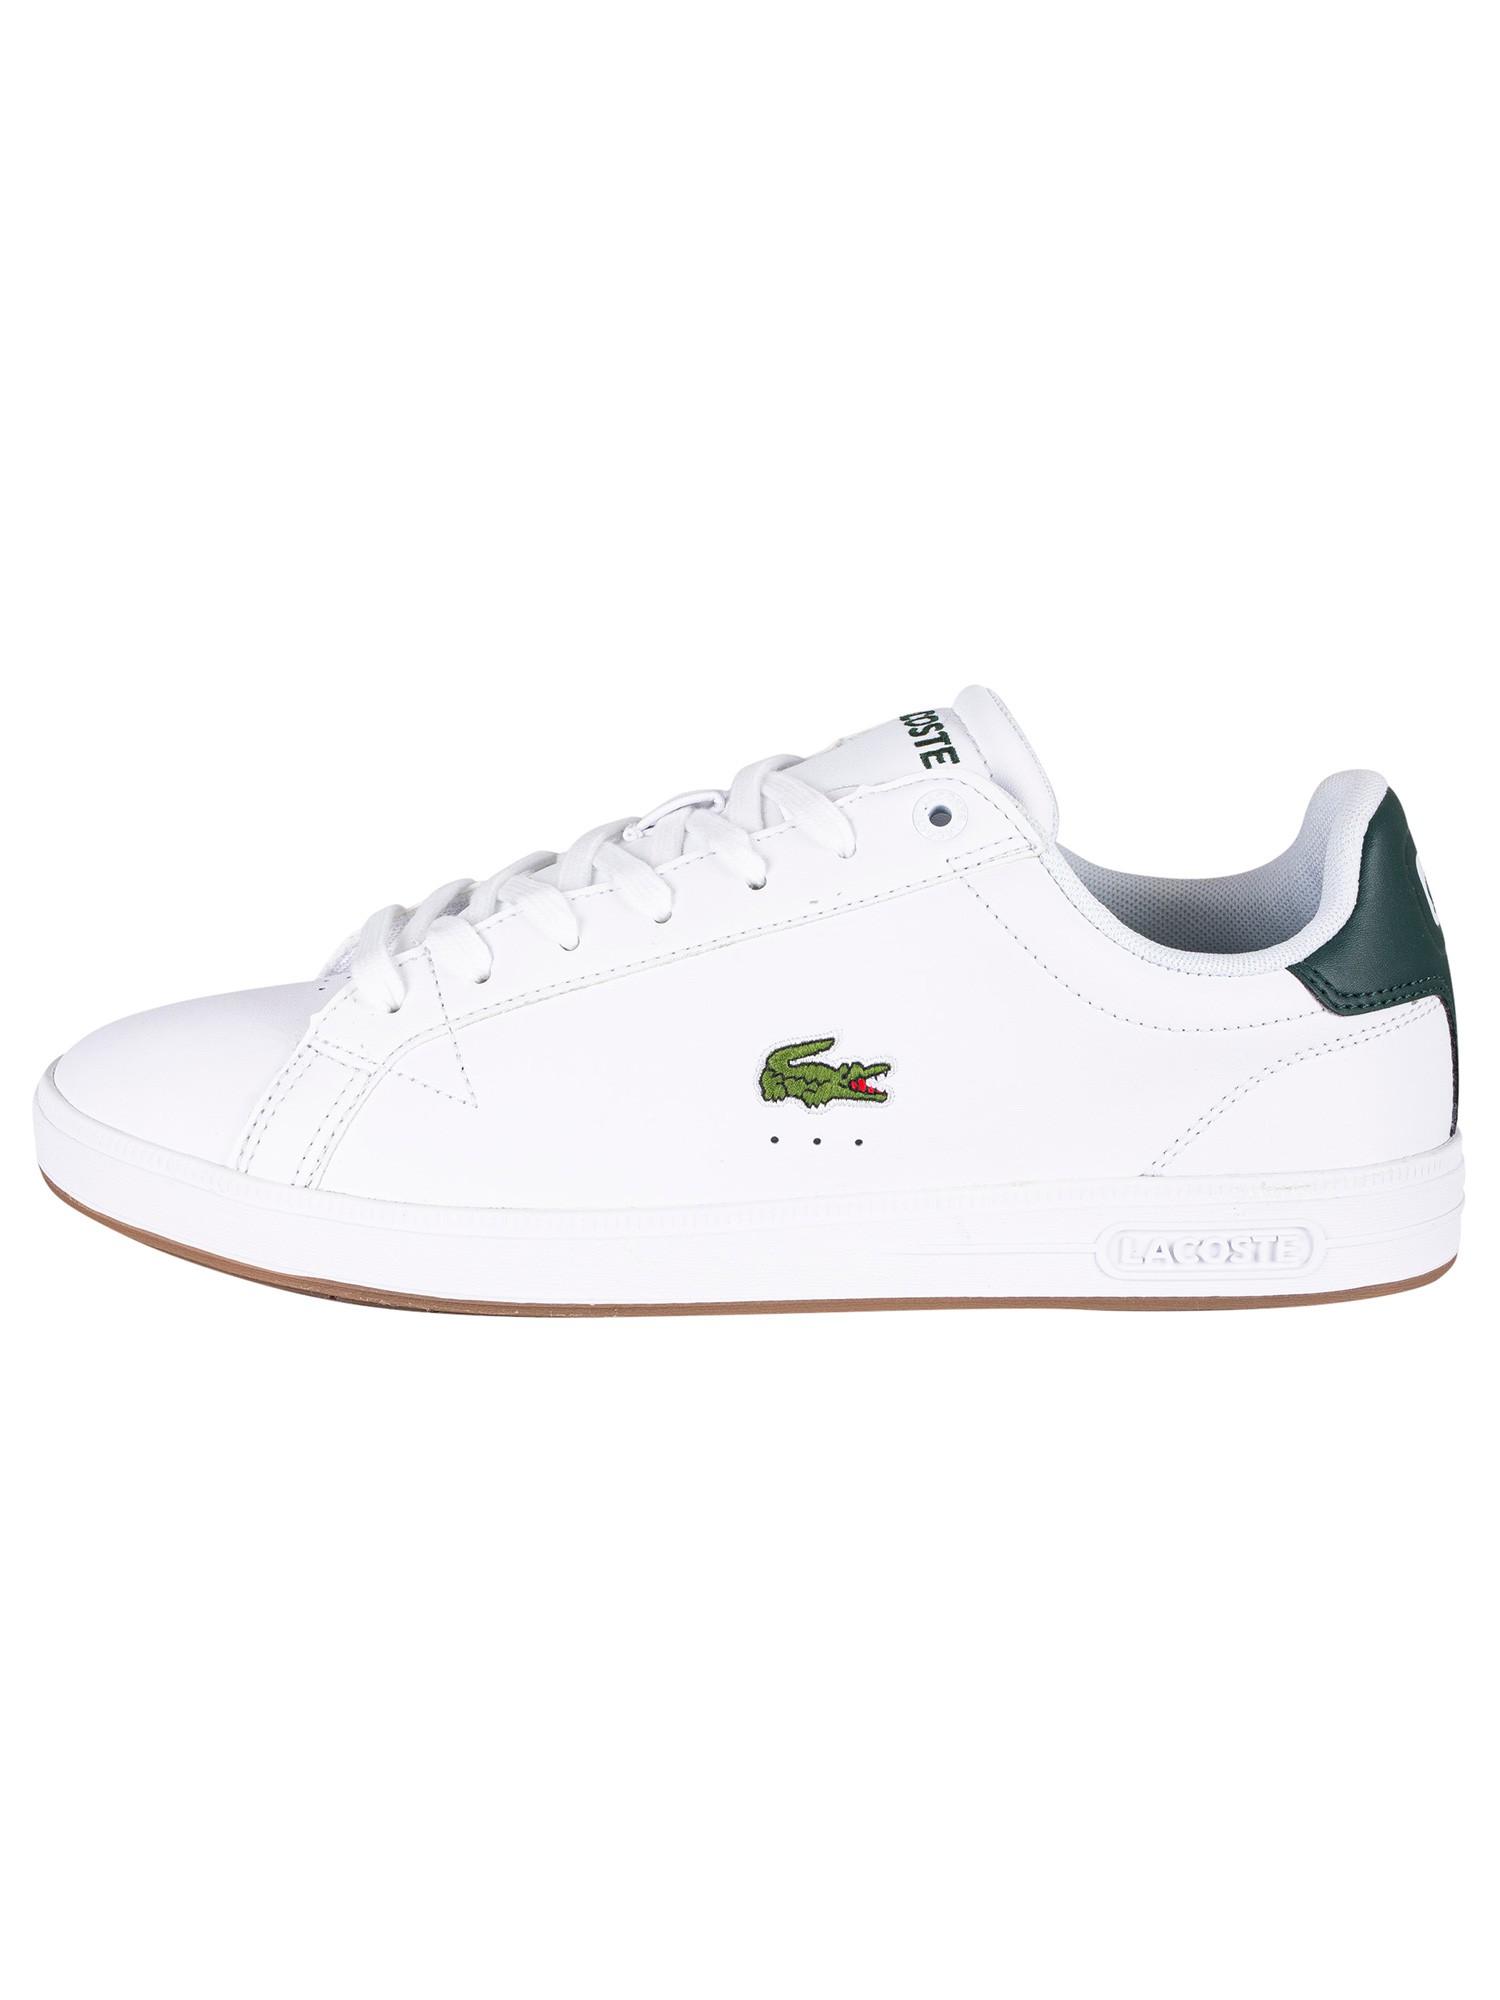 Lacoste Graduate Pro 222 1 Sma Leather Trainers in White for Men | Lyst